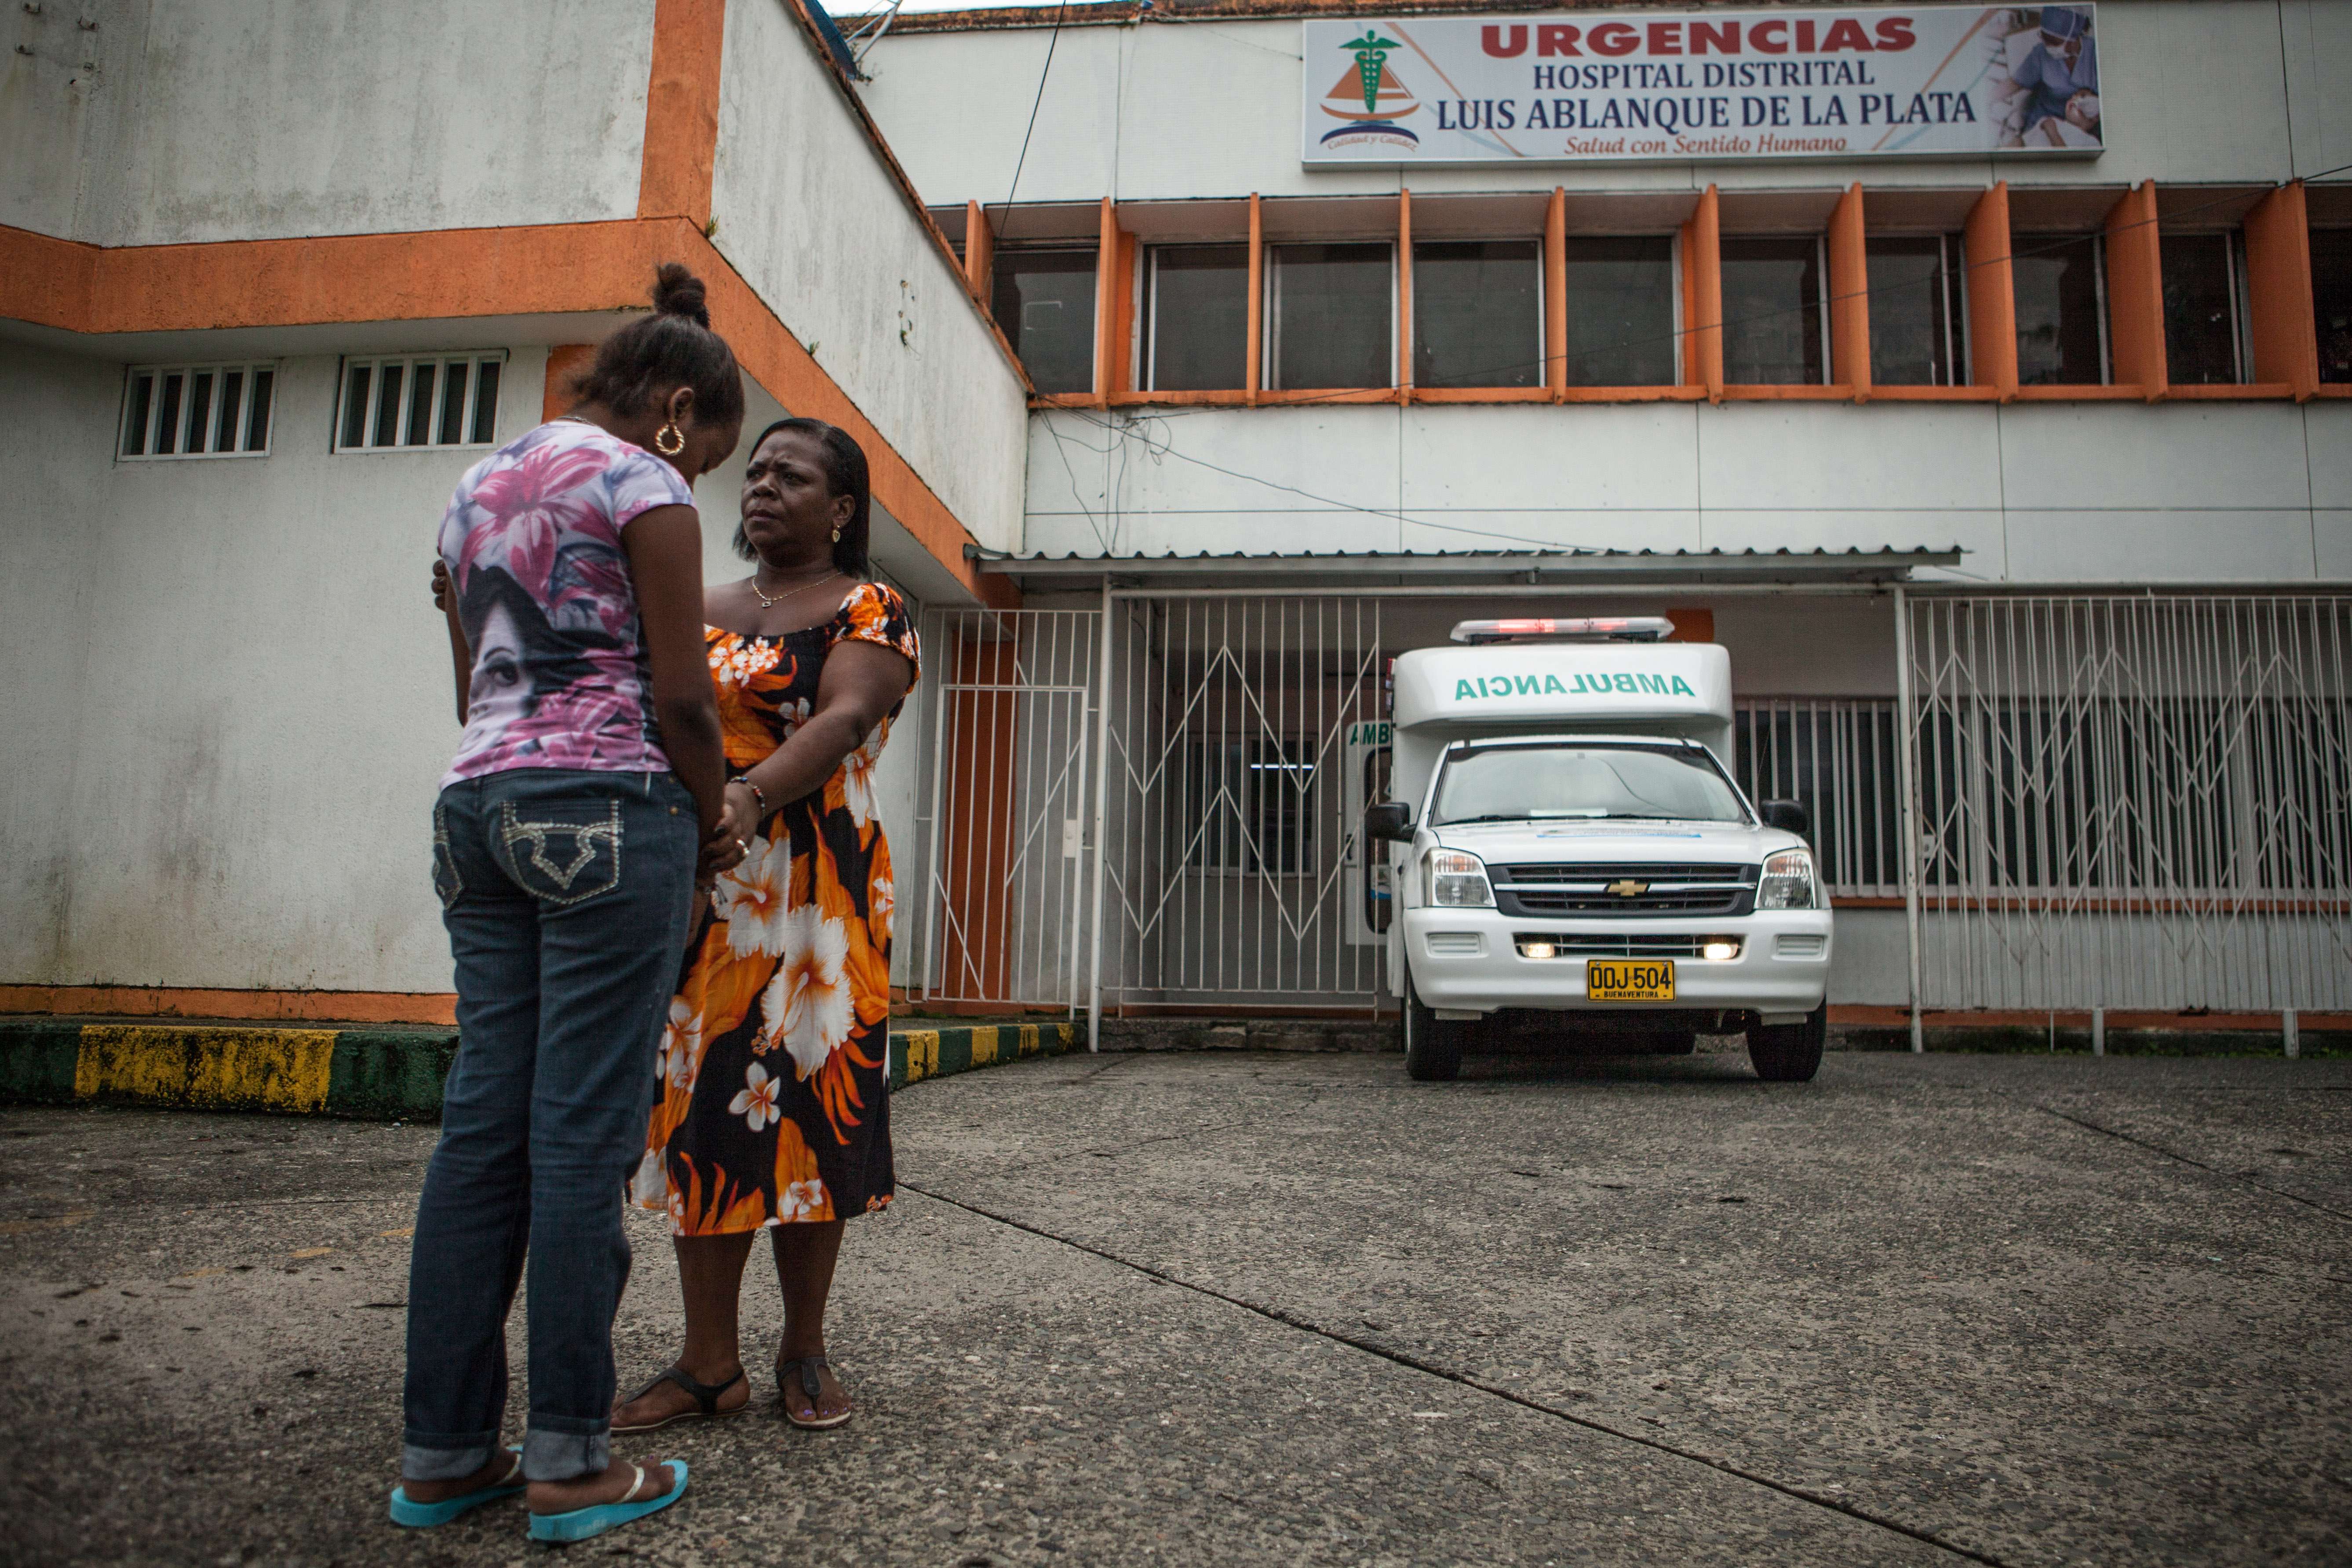 August 18, 2014. Mery Medina with Yadira Rodriguez Caicedo (16), assisting her about her health and assistant programs available to her at the hospital “Luis Ablanque de la Plata’ in the Neighborhood of Lleras in Buenaventura, Colombia.

Mery Medina (50); at high risk of displacement-Single mother to her son-Coordinates a group of 30 women whose husbands/sons have been assassinated or have disappeared-Helps to improve their financial position by offering cooking & sewing workshops-Helps SGBV survivors to speak and express their emotions-Didn’t have money to study, but her dream was always to become a social worker.

Butterflies of New Wings is a network comprised of about 120 core volunteers. Each woman is tasked with recruiting five new women so that their reach will become wider. The group is described as a “ protection network of women helping women within the armed conflict.” Part of their strategy is to stay below the radar of the armed groups - of which there are many- in Buenaventura. 

Paramilitary groups have controlled Buenaventura, Valle del Cauca department, since 2006. The Urabeños and the Empresa are the main groups operating in the port city. However, since 2009 Cauca has had the largest number of armed actions in Colombia. They restrict residents’ movement – attacking people if they step foot into the wrong street (crossing the invisible yet strict borders).

Photo Credit: Juan Arredondo for UNHCR.